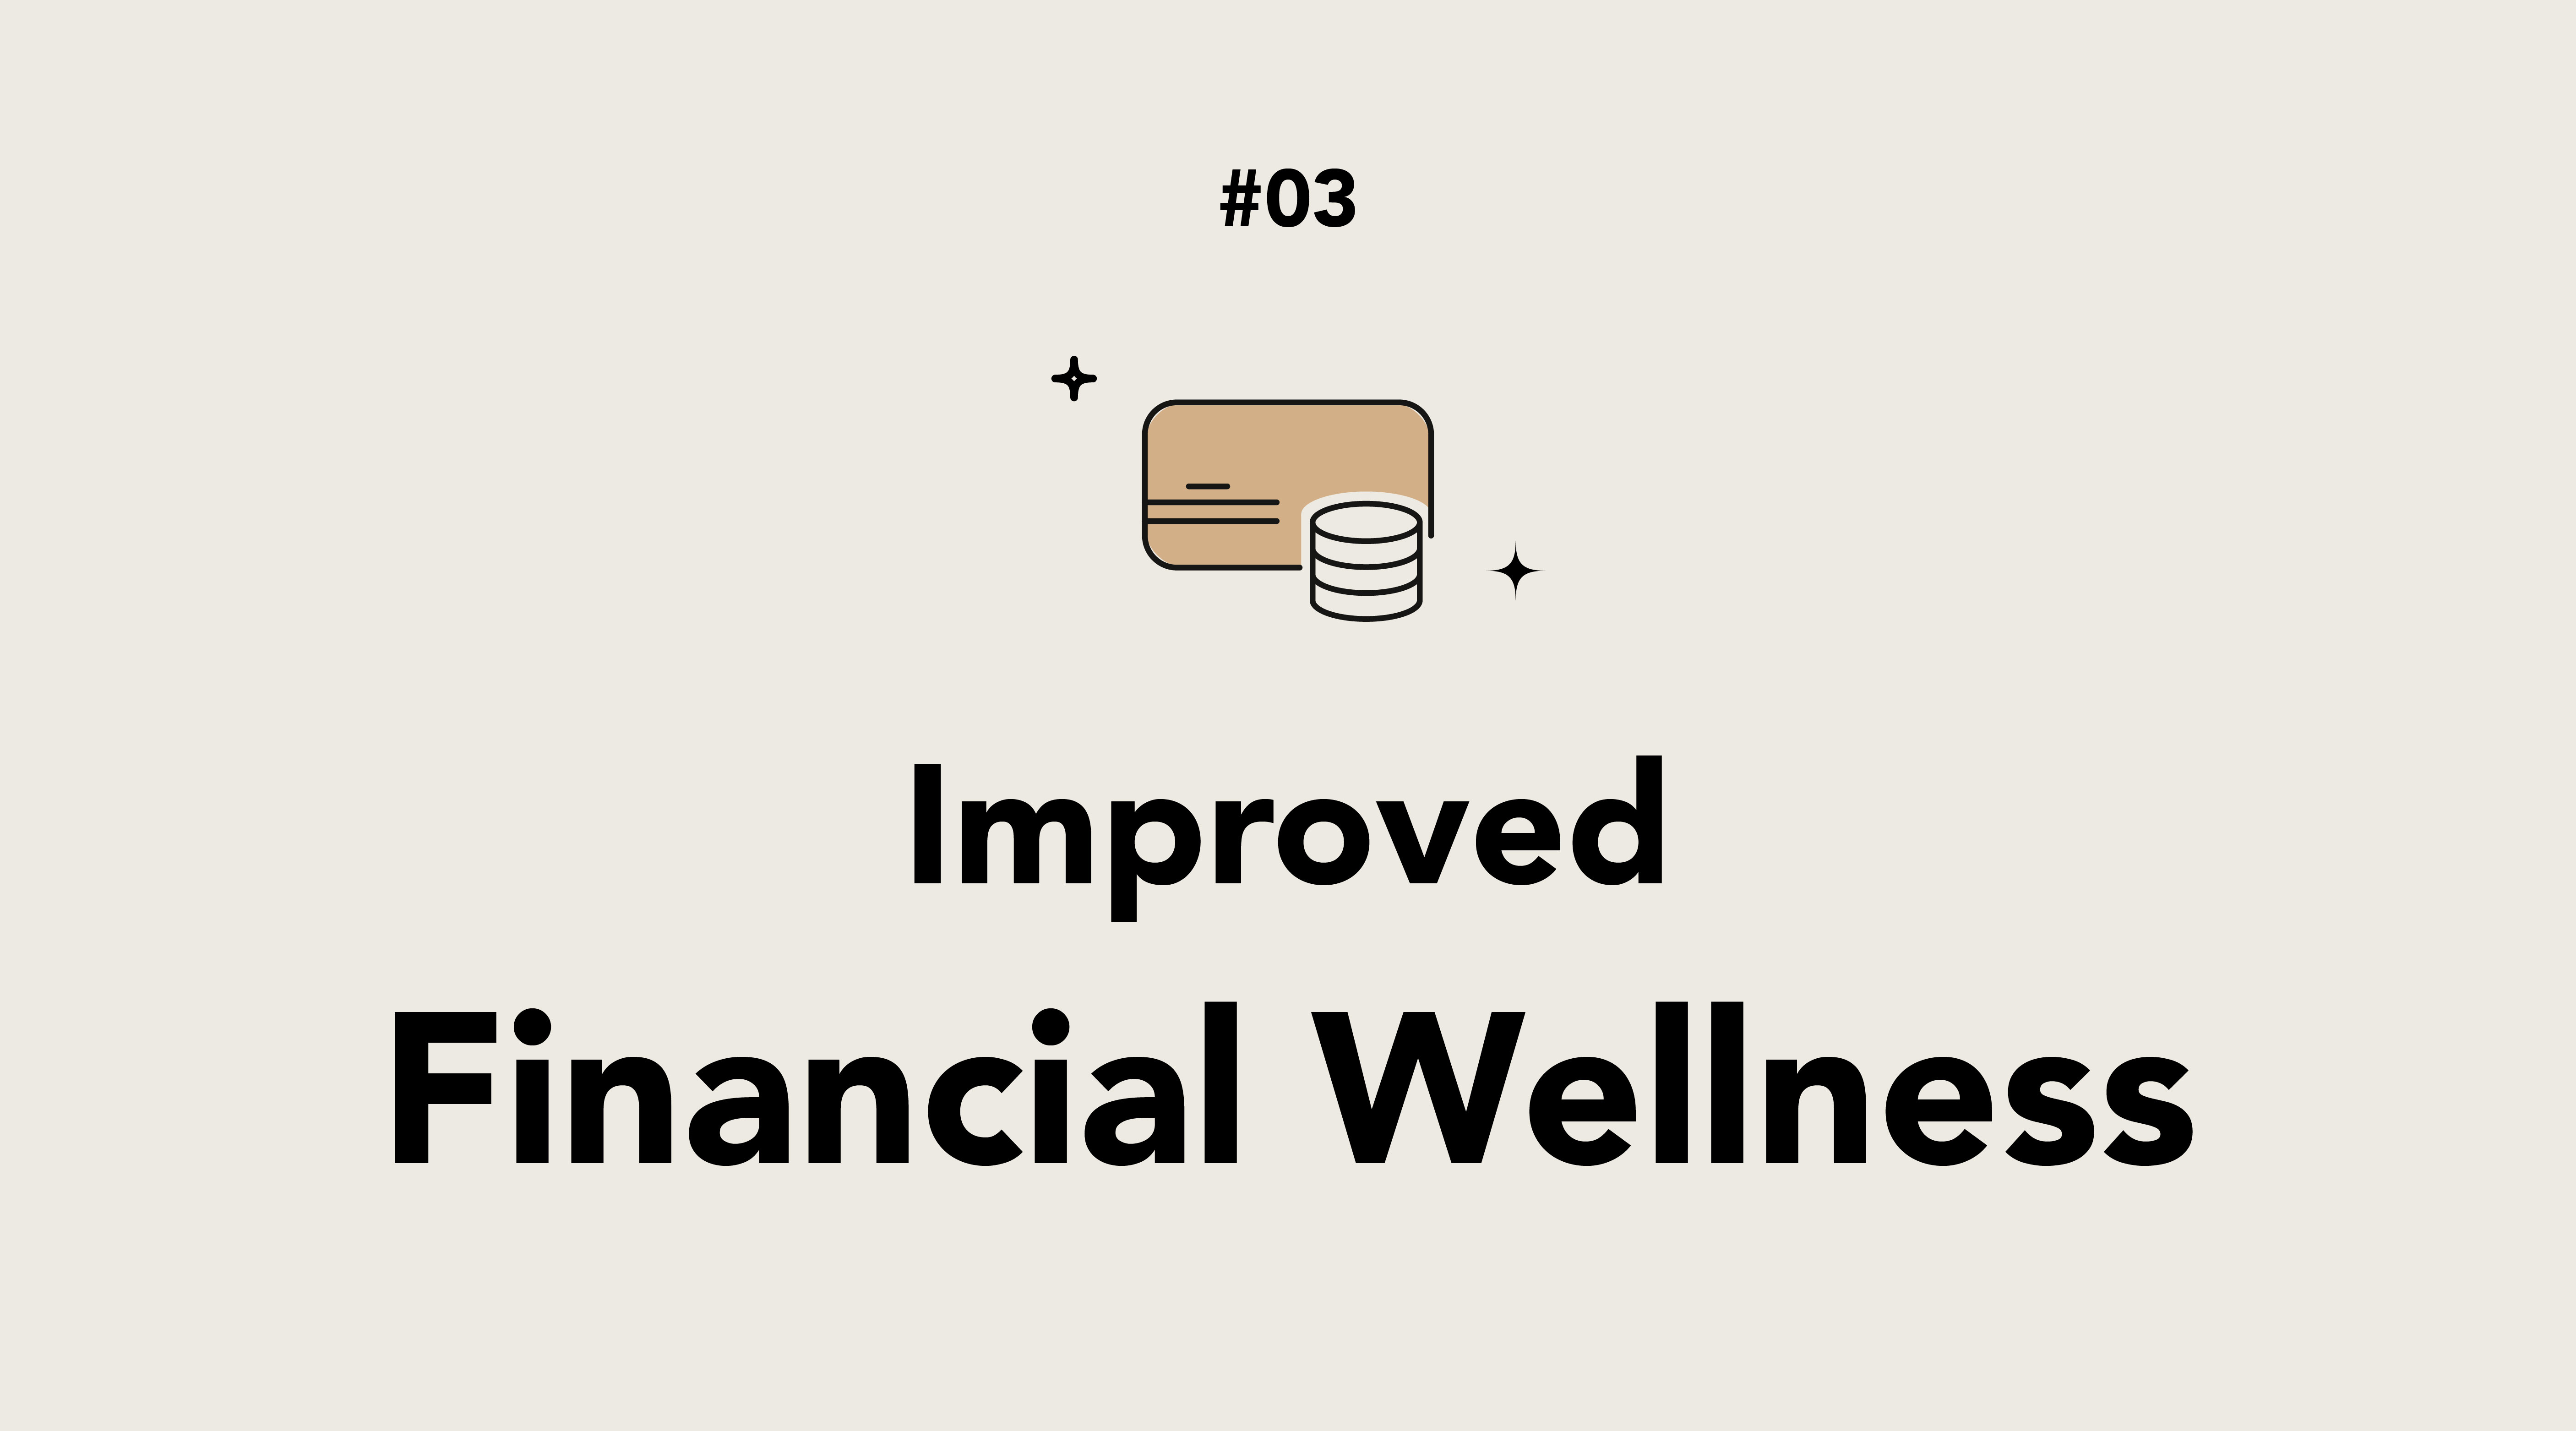 financial wellness, health, wellness and wellbeing, wellness, wellbeing, slow living, lifestyle